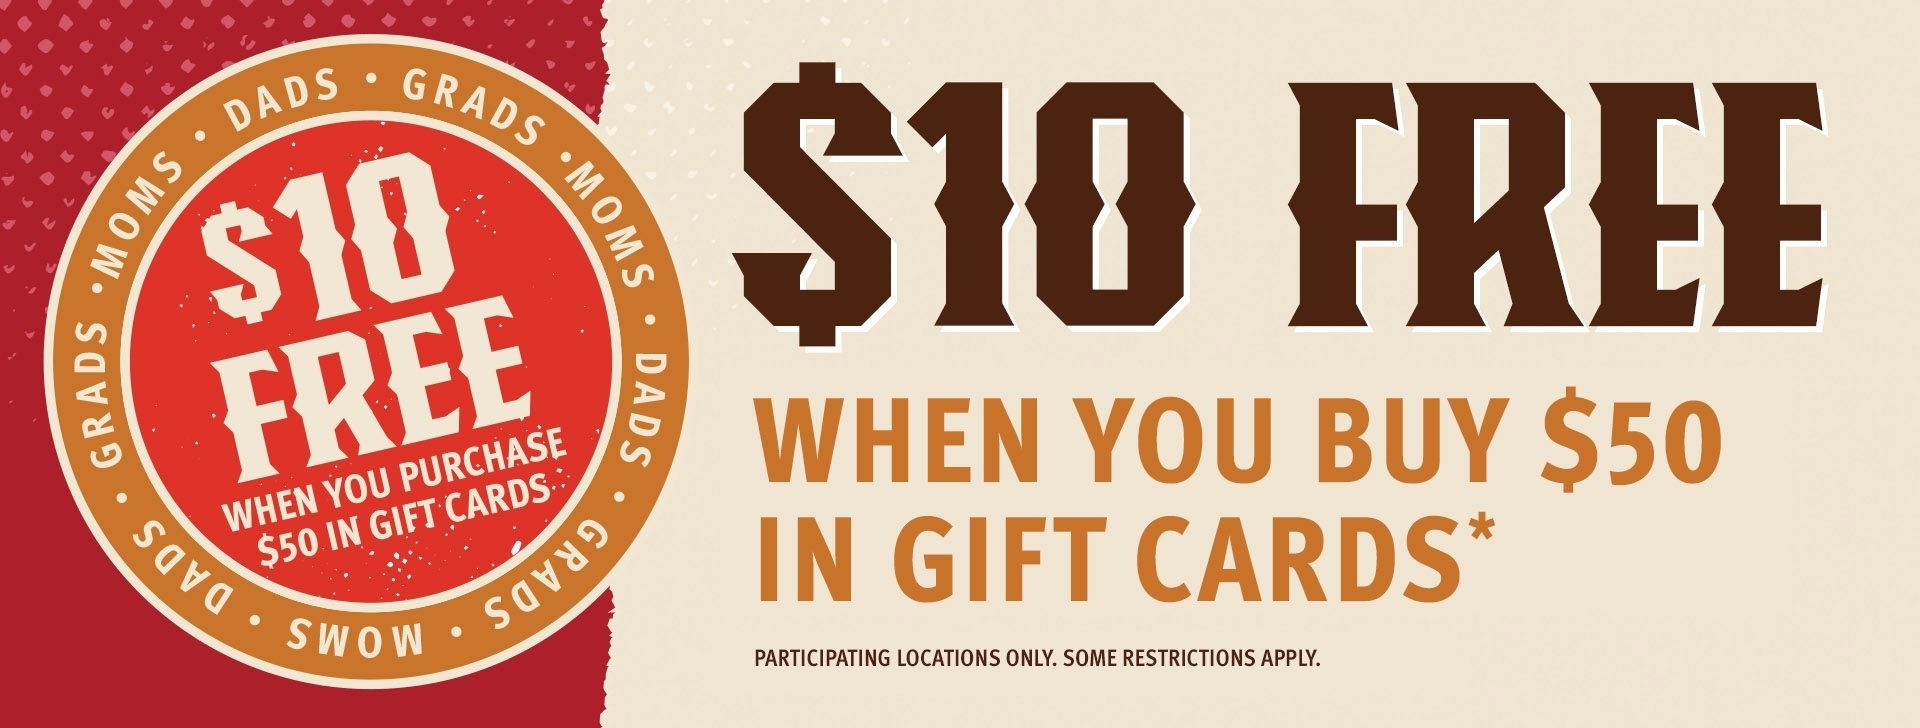 Pizza Ranch Mothers Day Buy $50 Gift Cards, Get a Free $10 Bonus Coupon